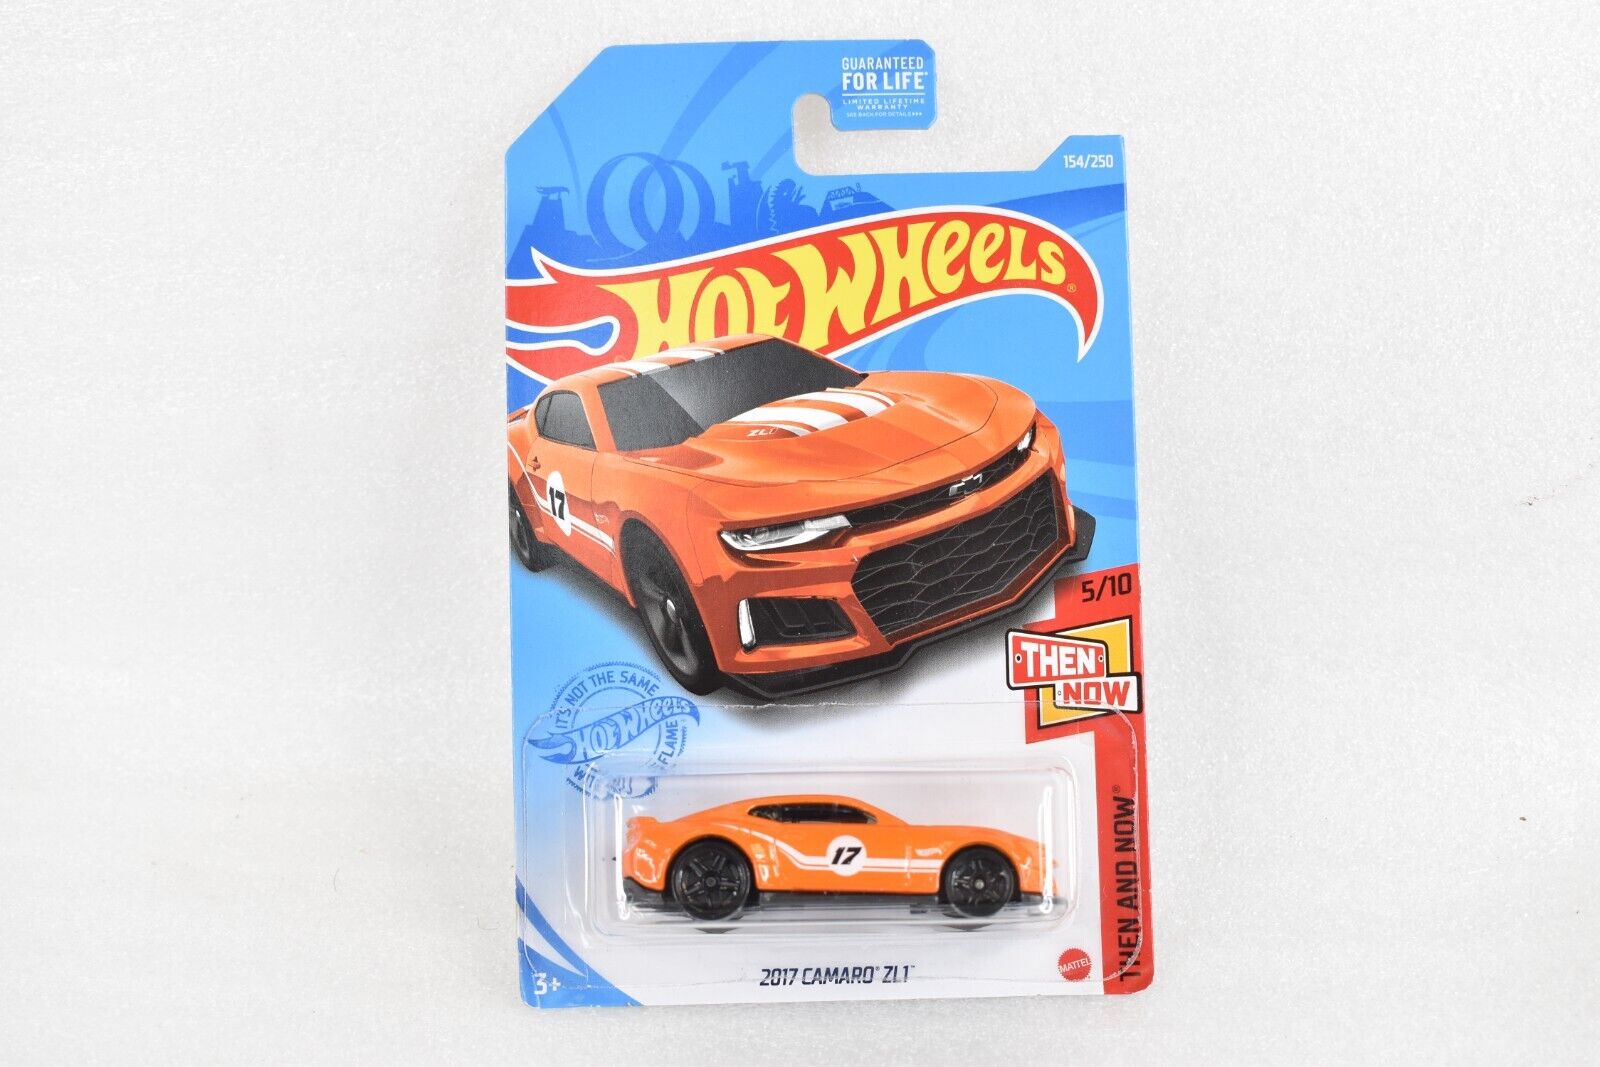 Hot Wheels 2021 Camaro ZL1 2017 Then And Now 154/250 New